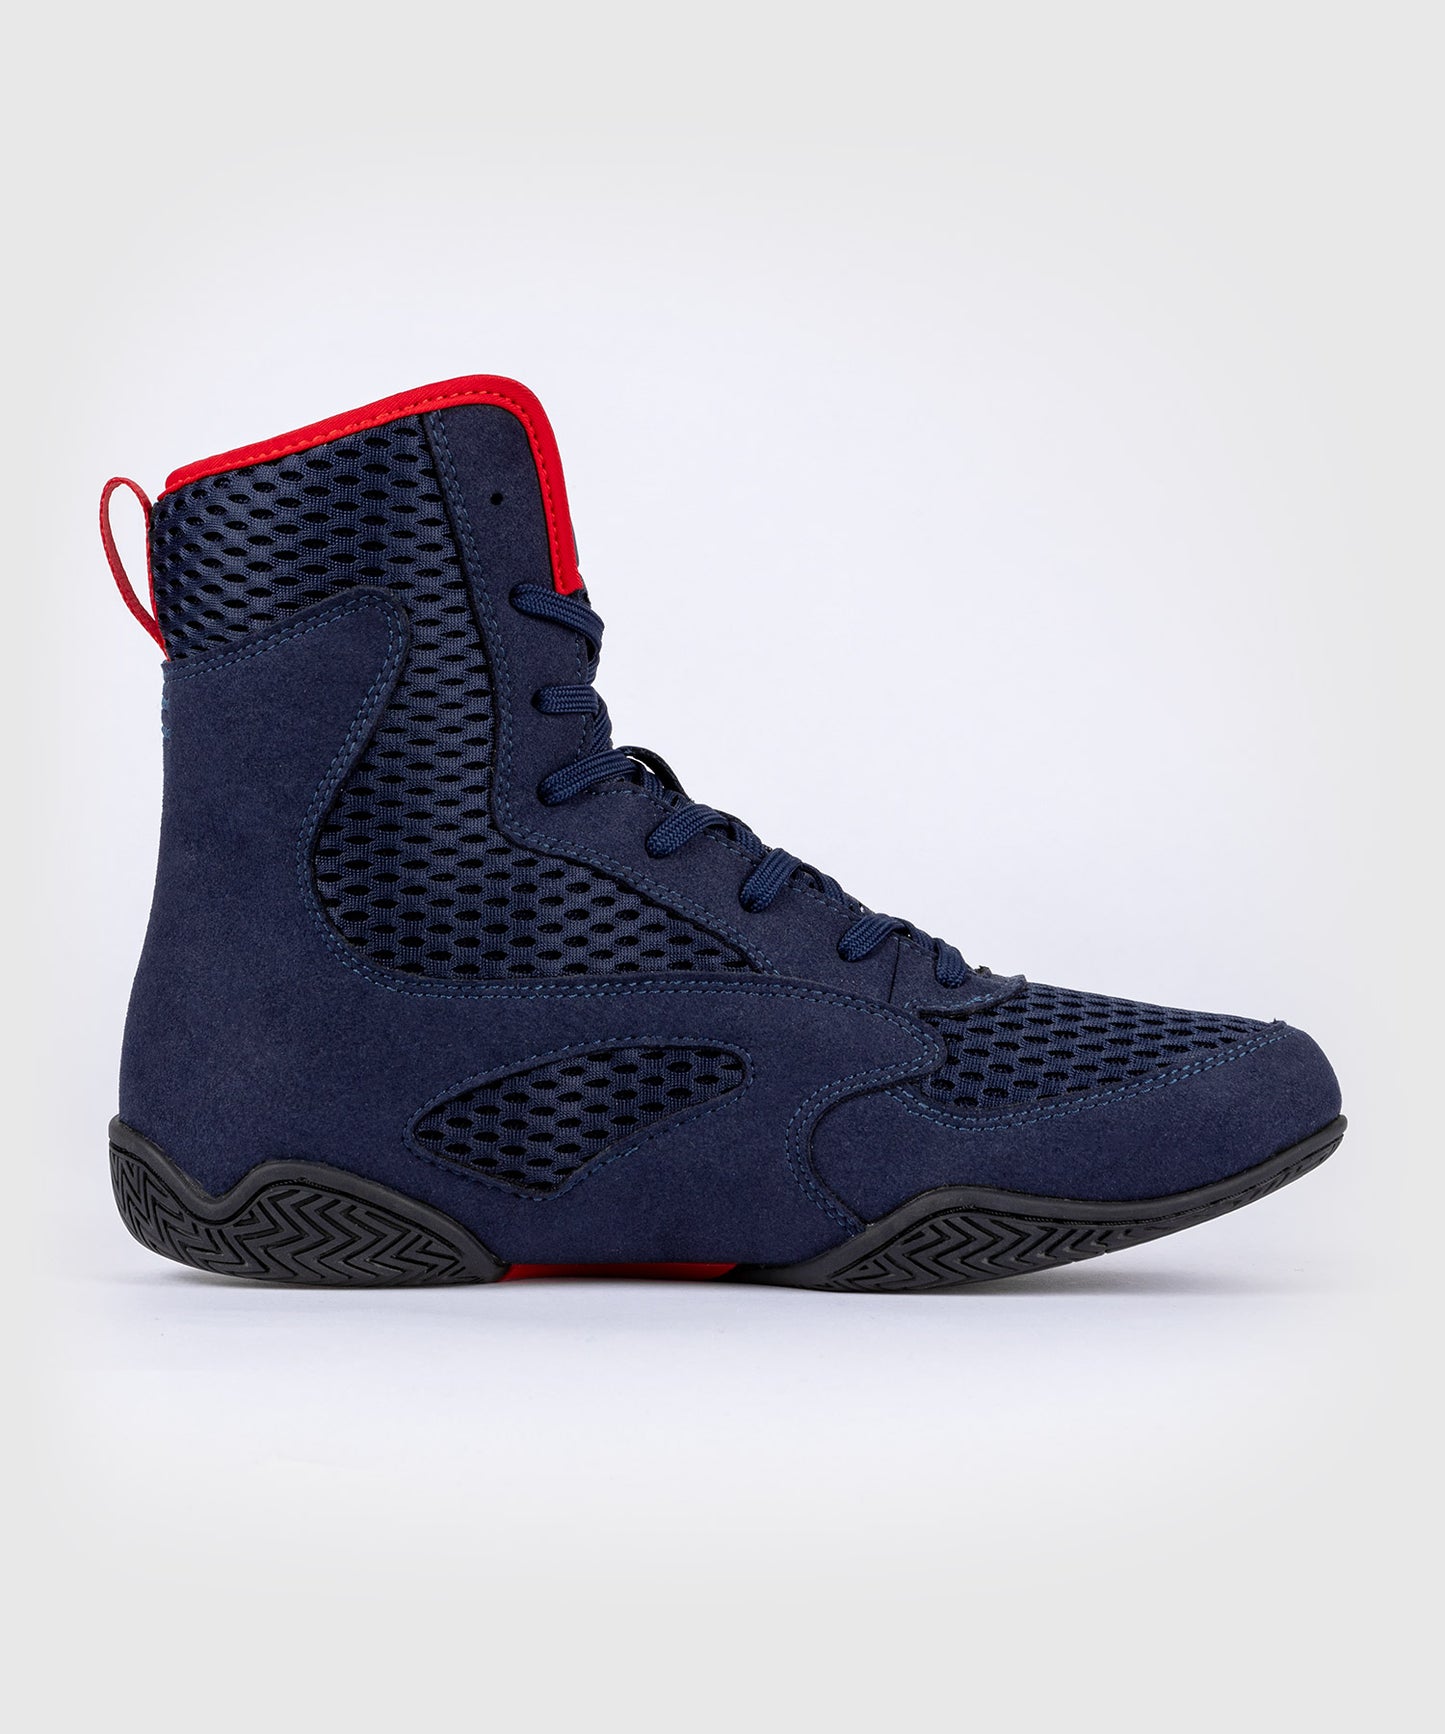 Venum Contender Boxing Shoes - Navy Blue/Red